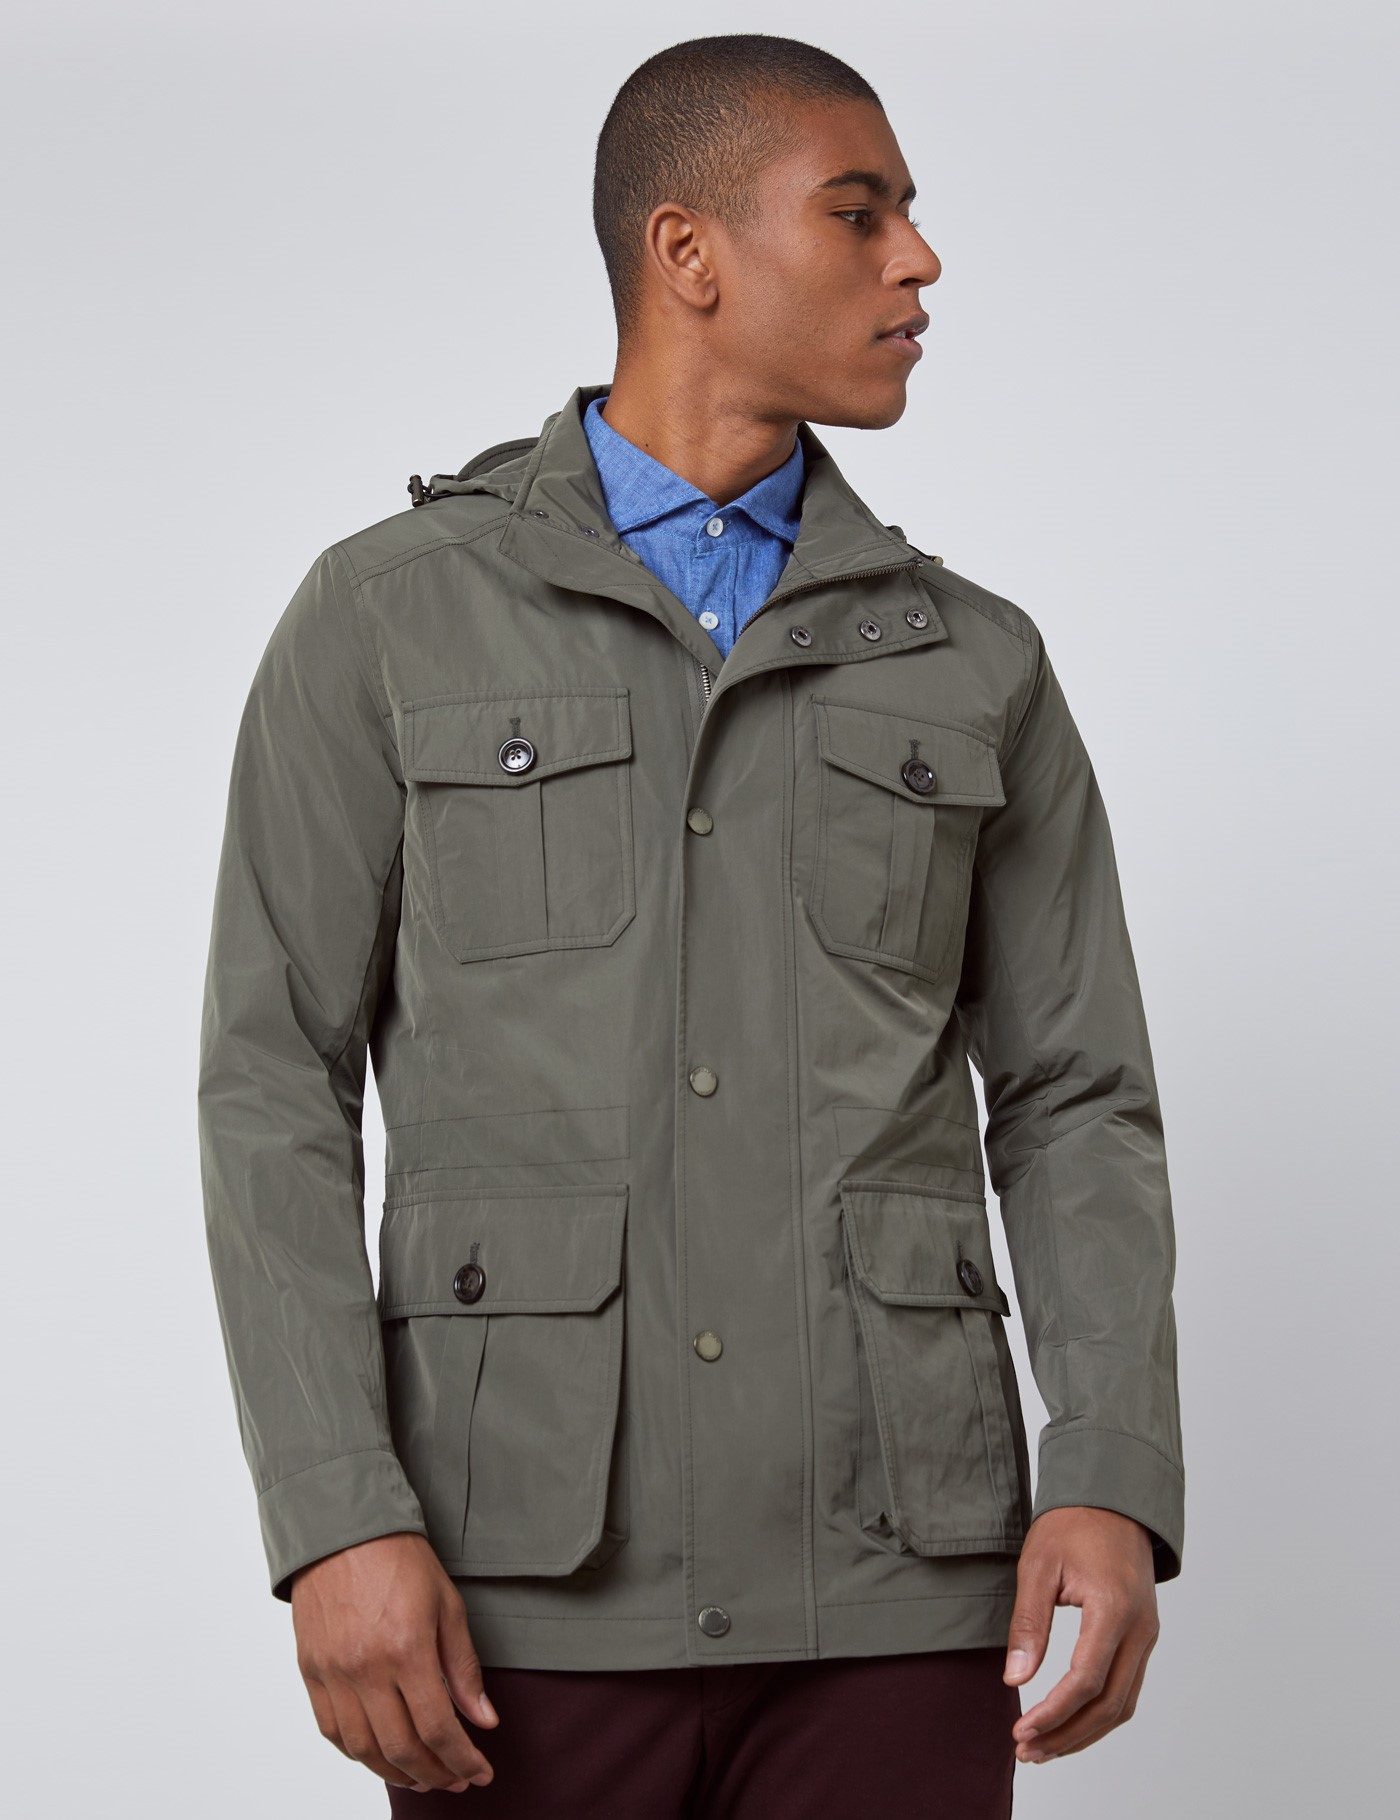 Weather Resistant Men’s Field Jacket with Removable Hood in Green